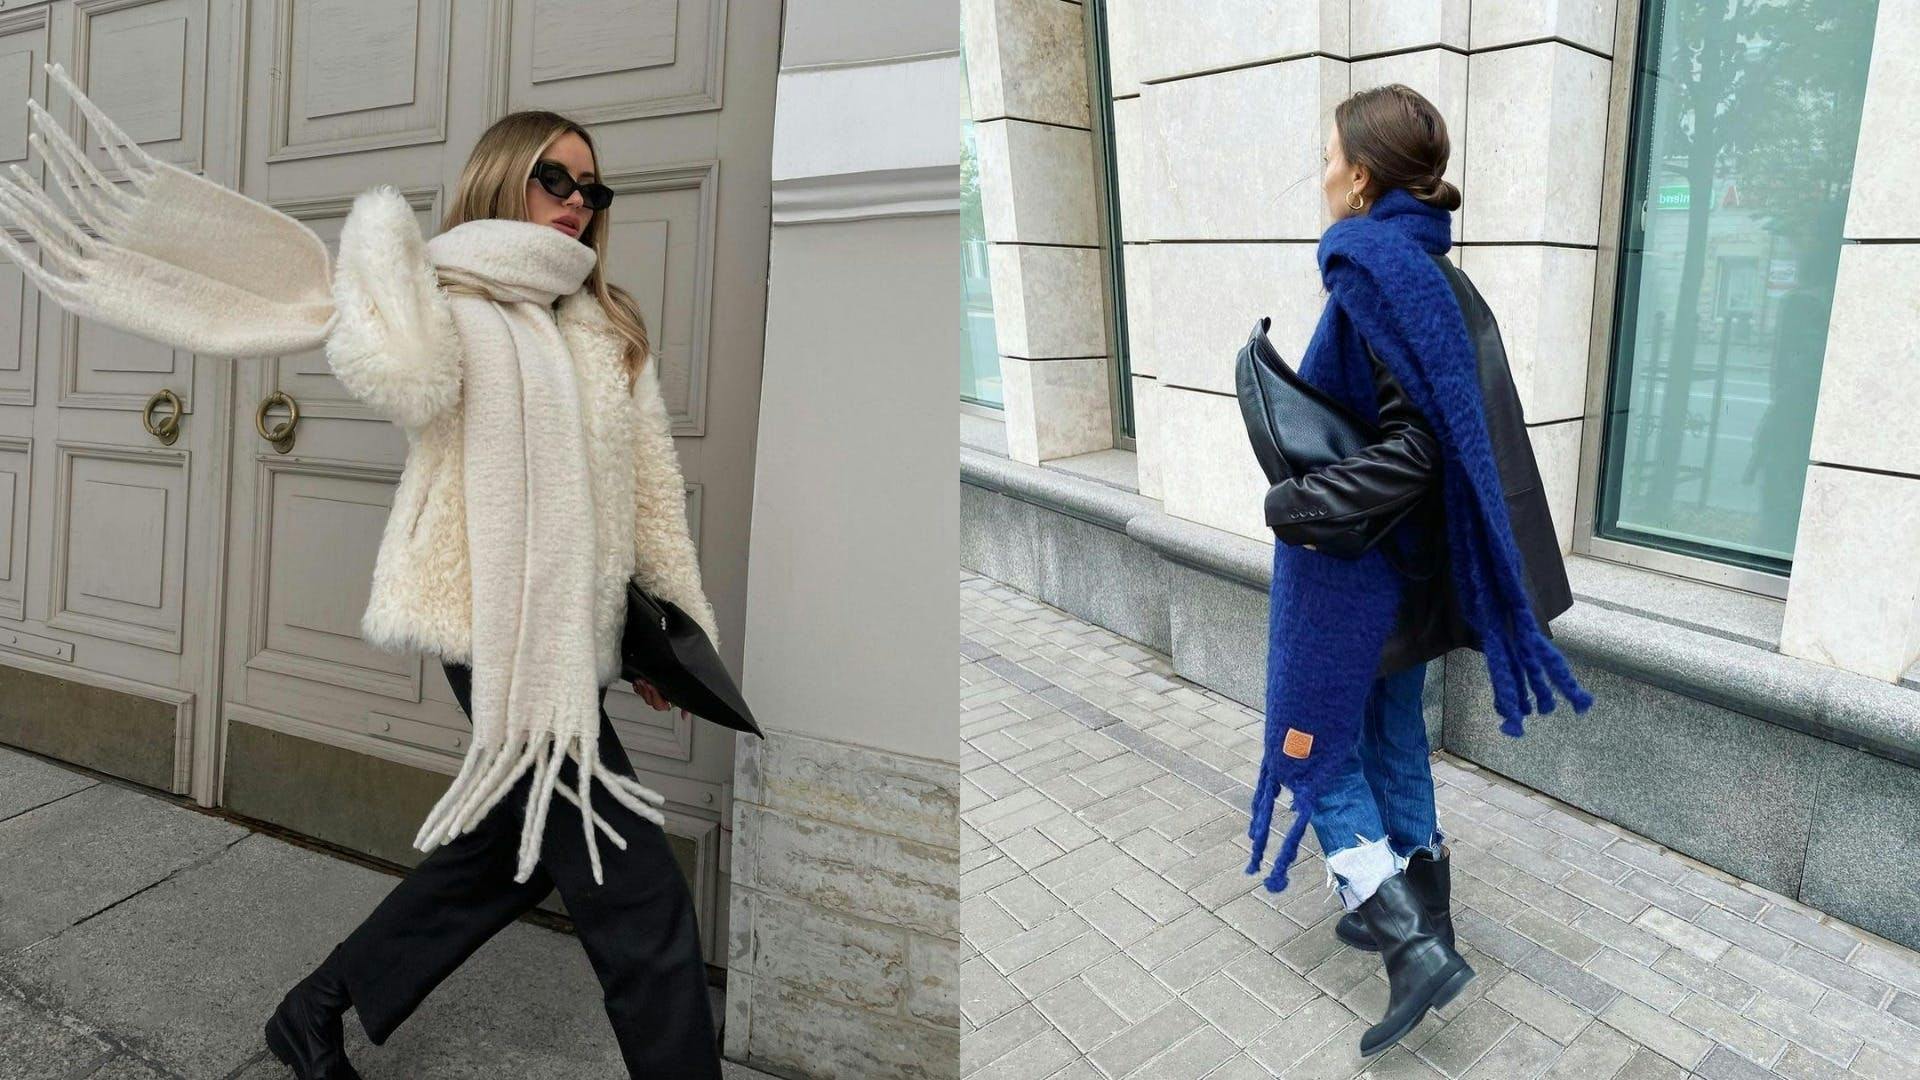 The Scarf-and-Coat Outfit Trend Everyone Is Obsessed With